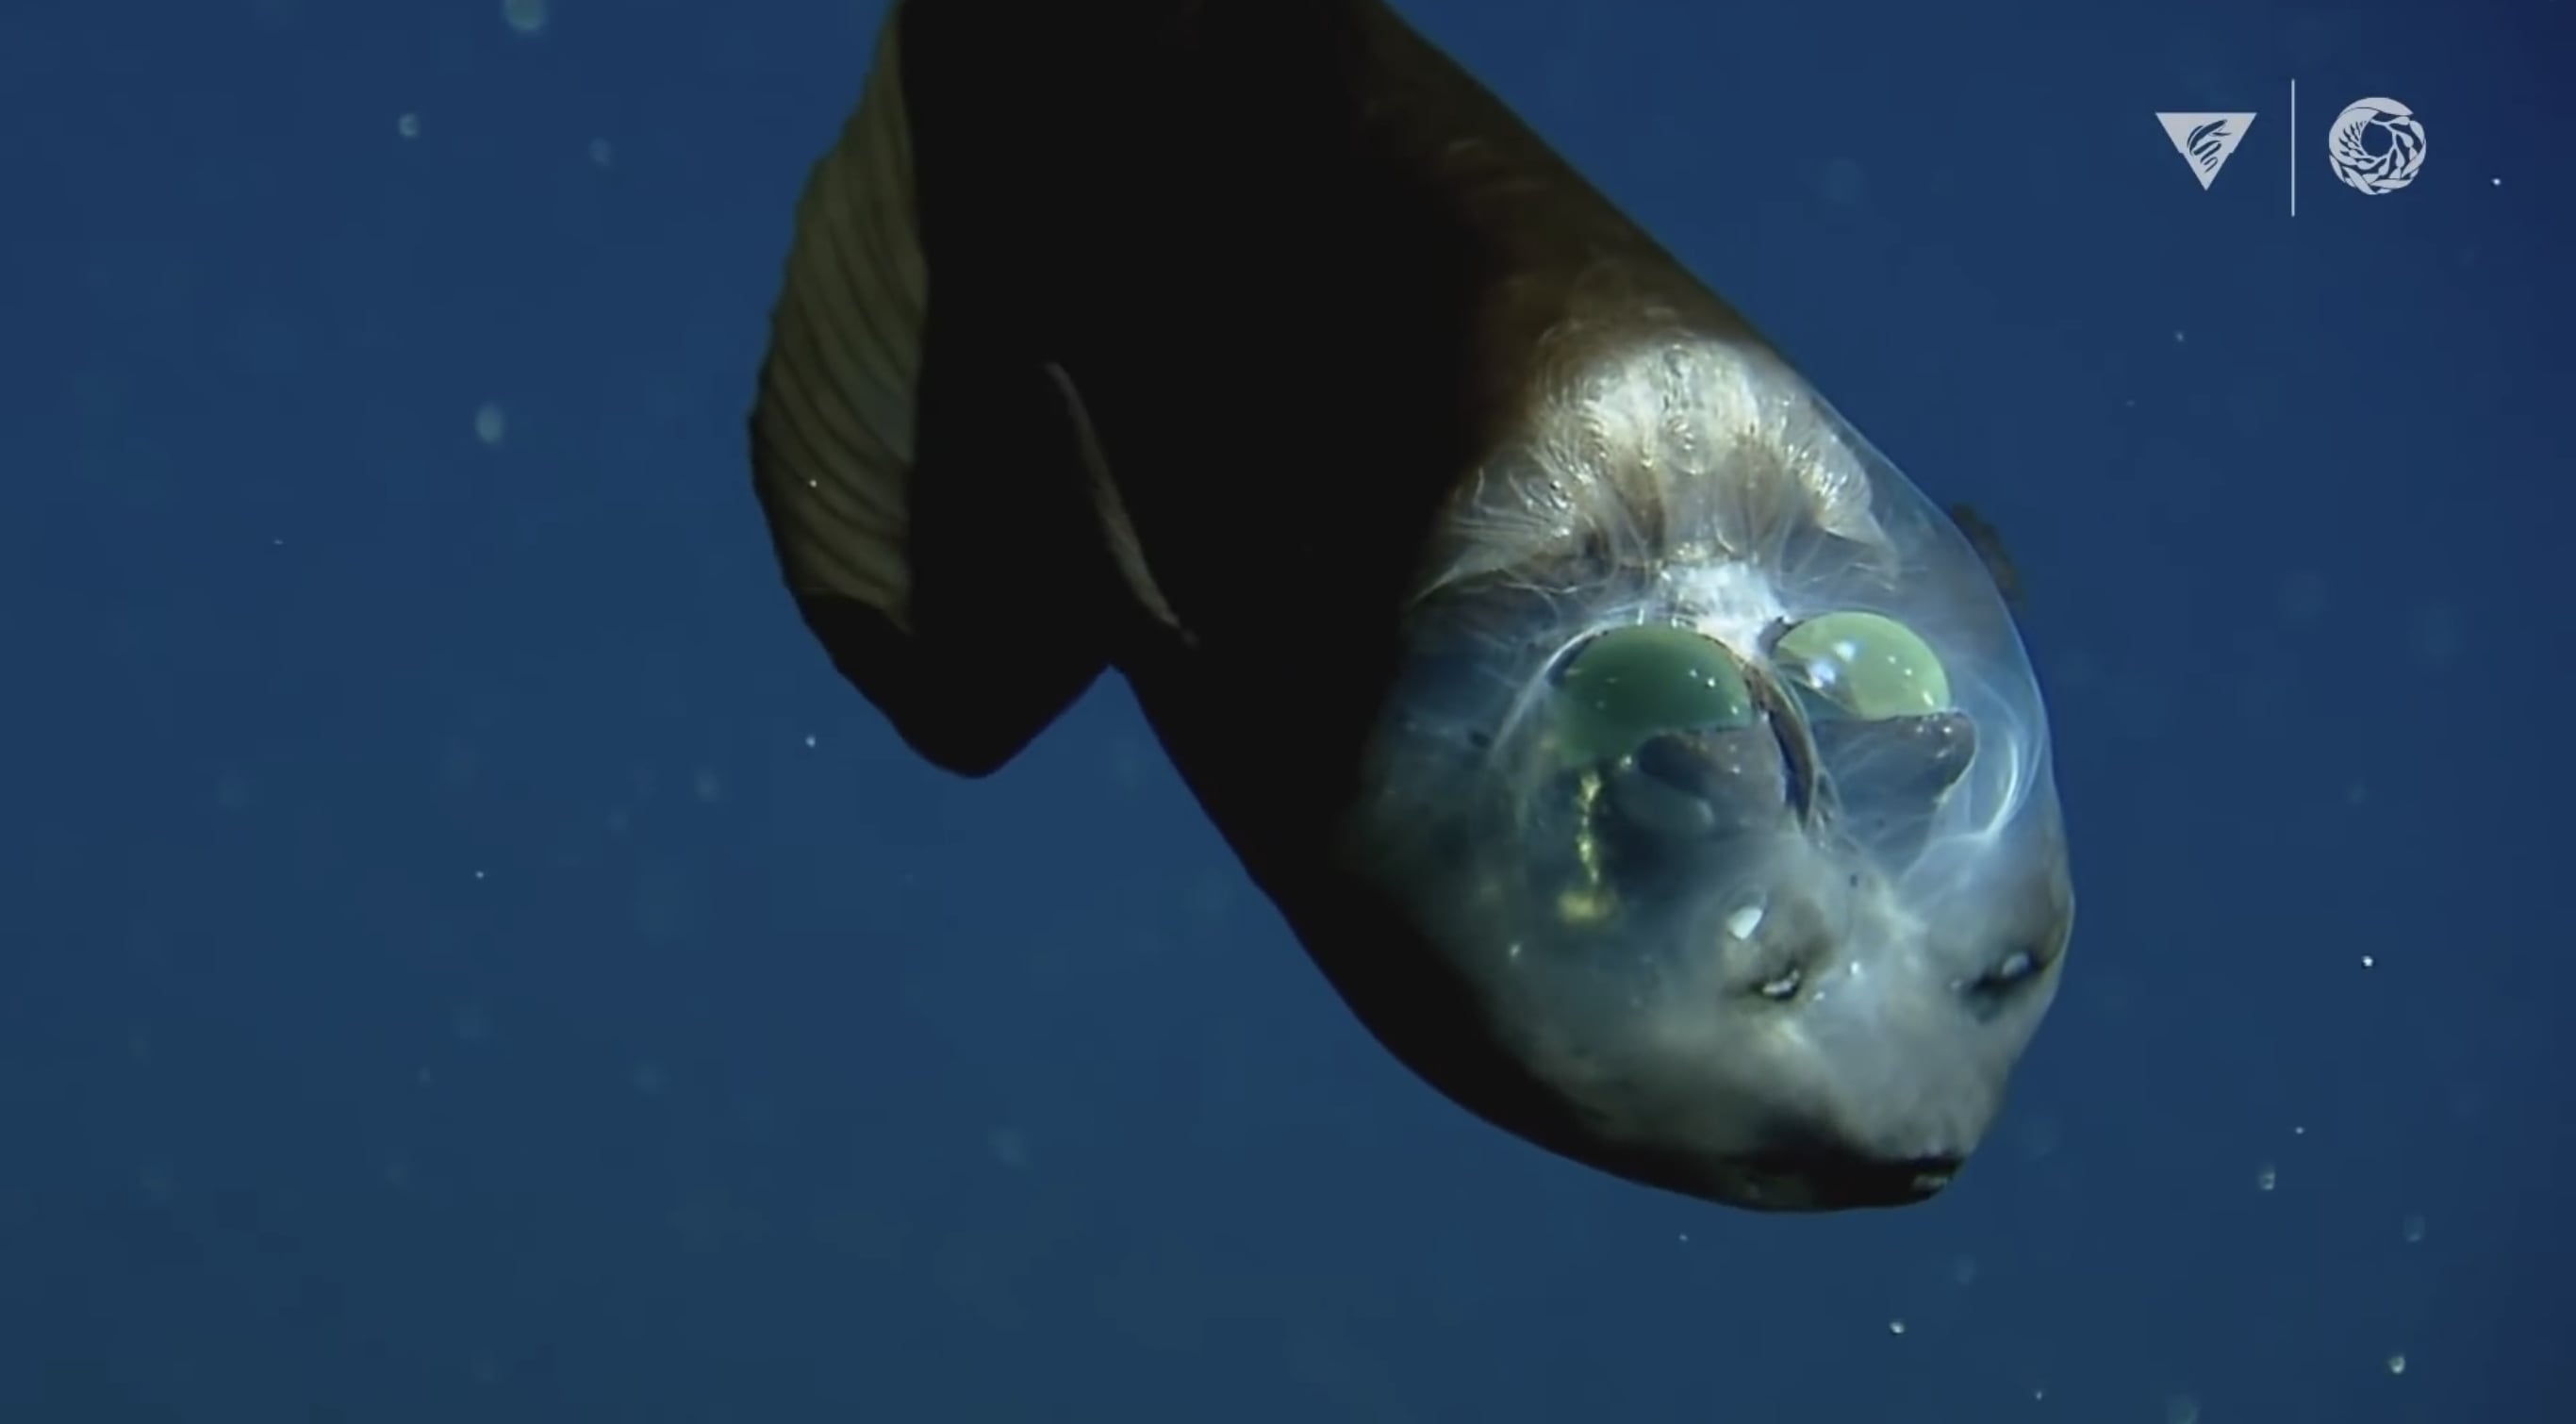 Voted weirdest creature of the deep by the undersea researchers of MBARI